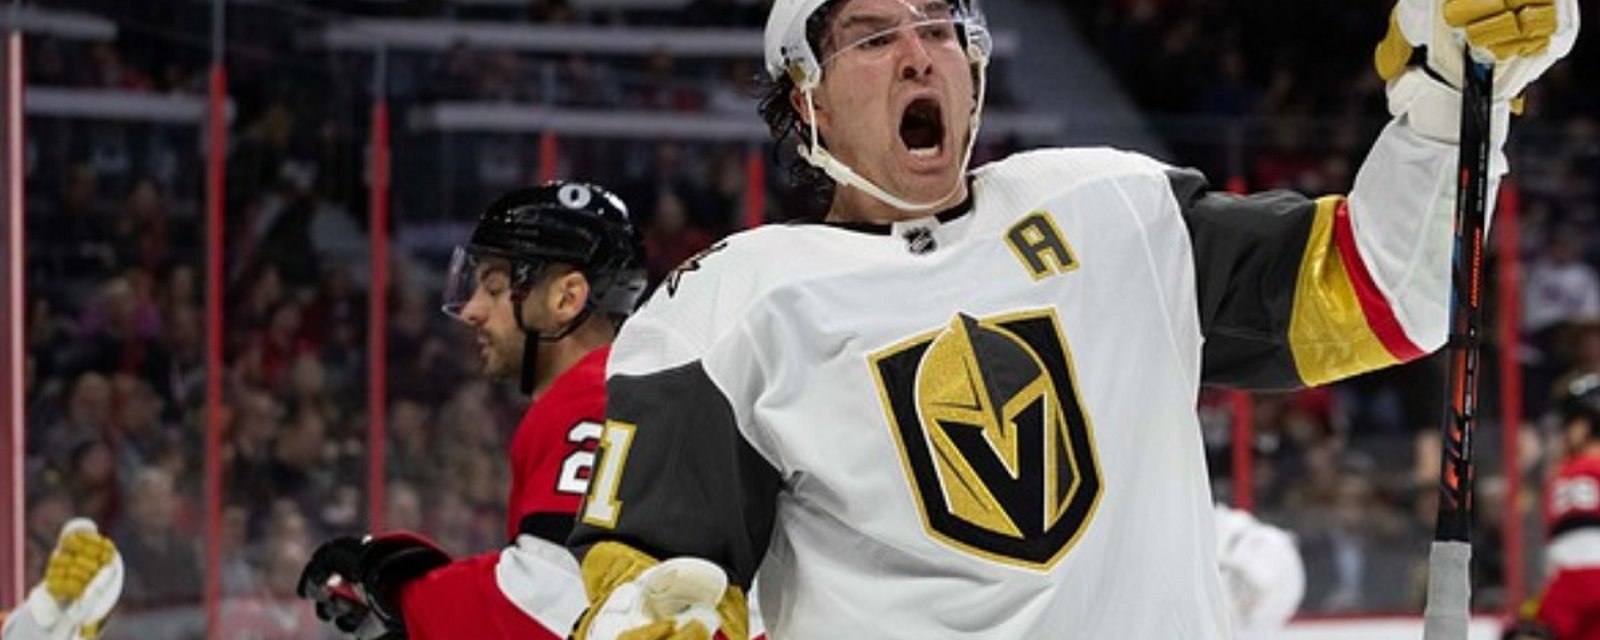 Golden Knights evicted from their hotel on Friday.